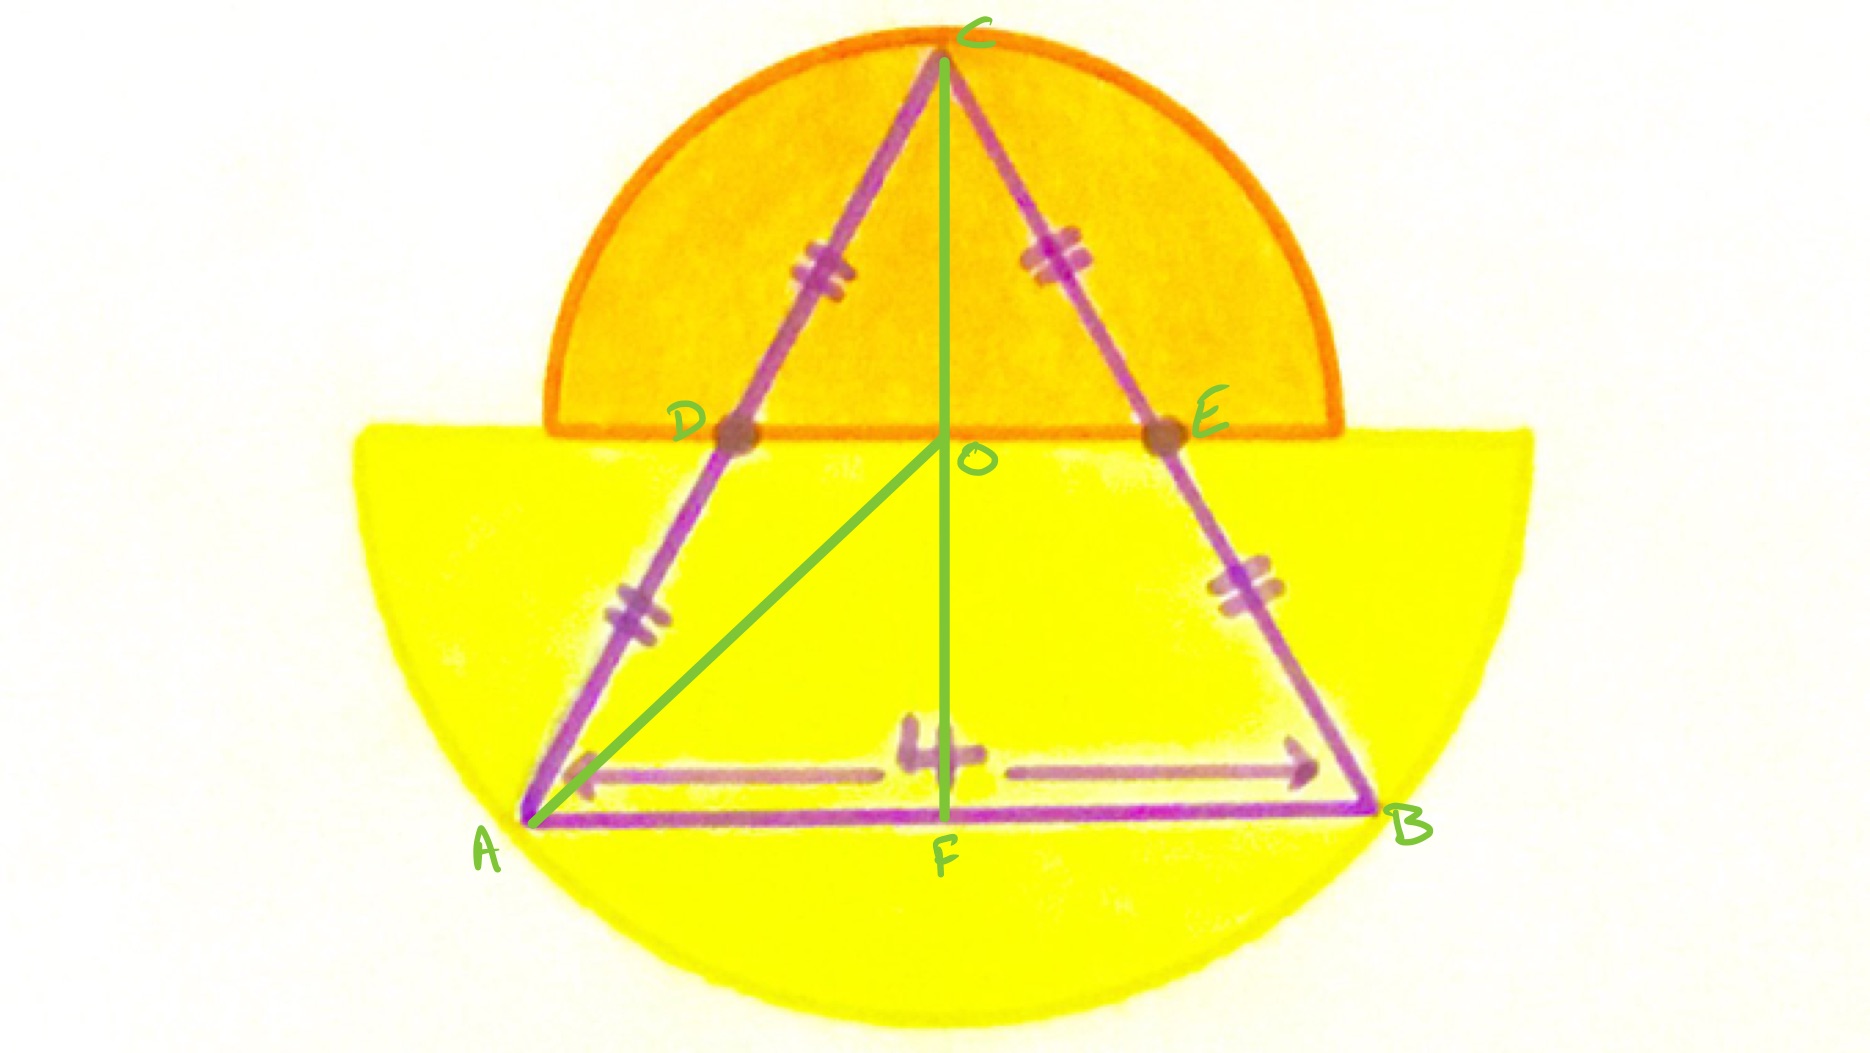 Two semi-circles and an equilateral triangle labelled